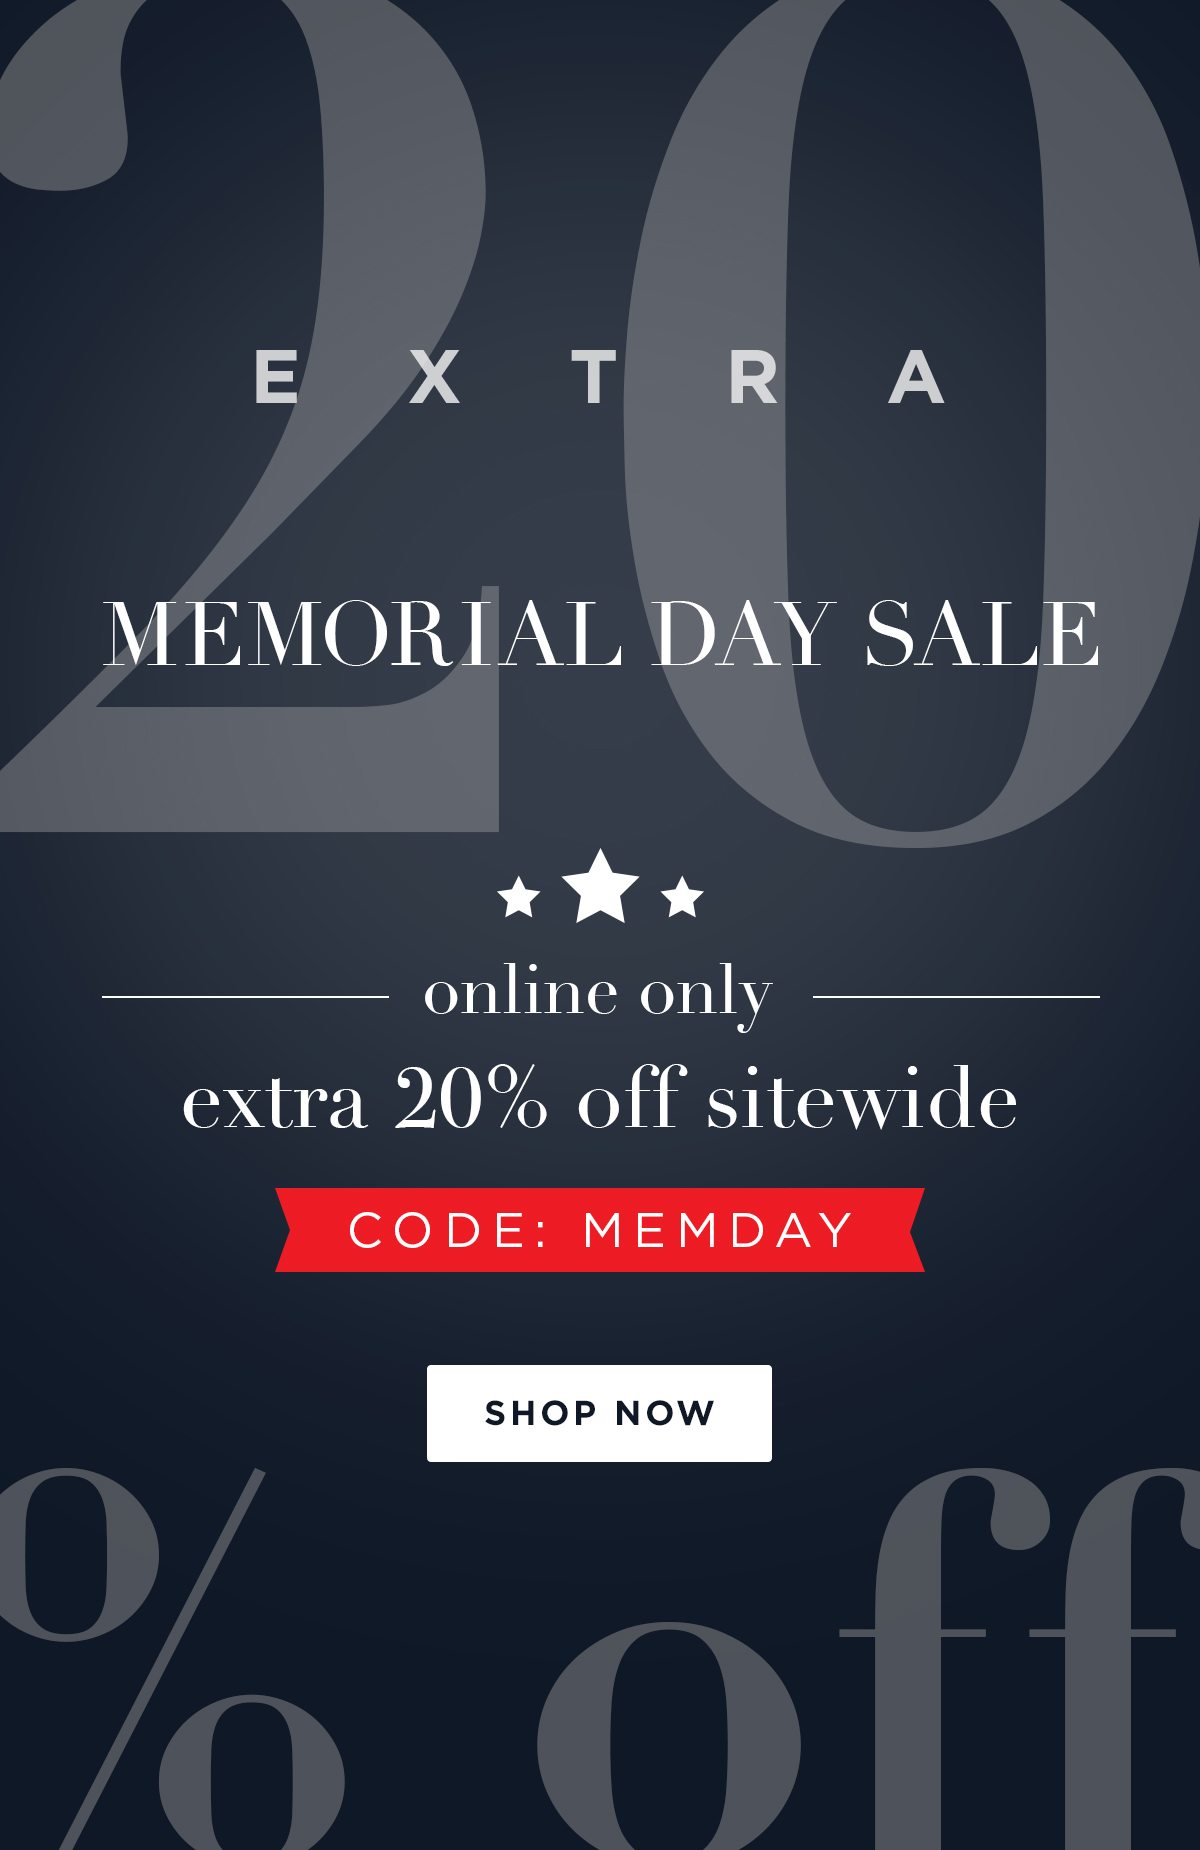 Memorial Day Sale - Extra 20% Off Sitewide With Code: MEMDAY - Shop Now!